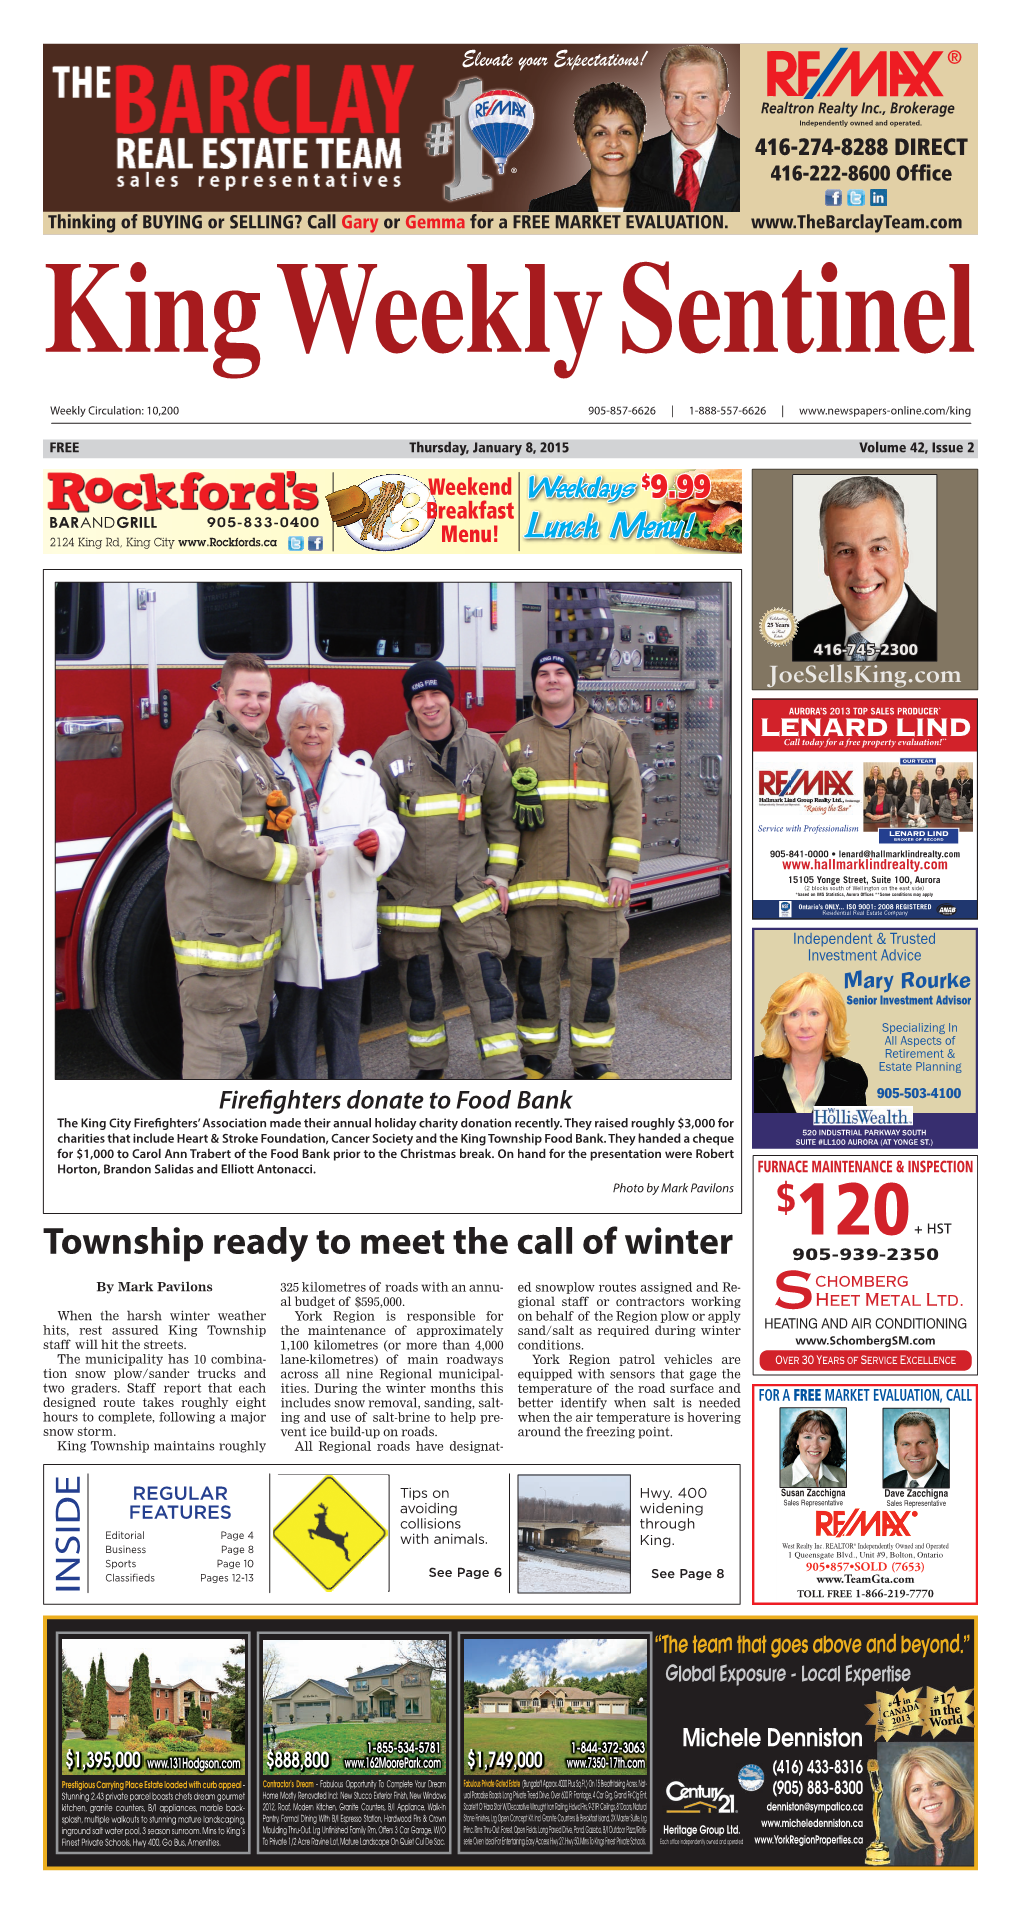 Township Ready to Meet the Call of Winter 905-939-2350